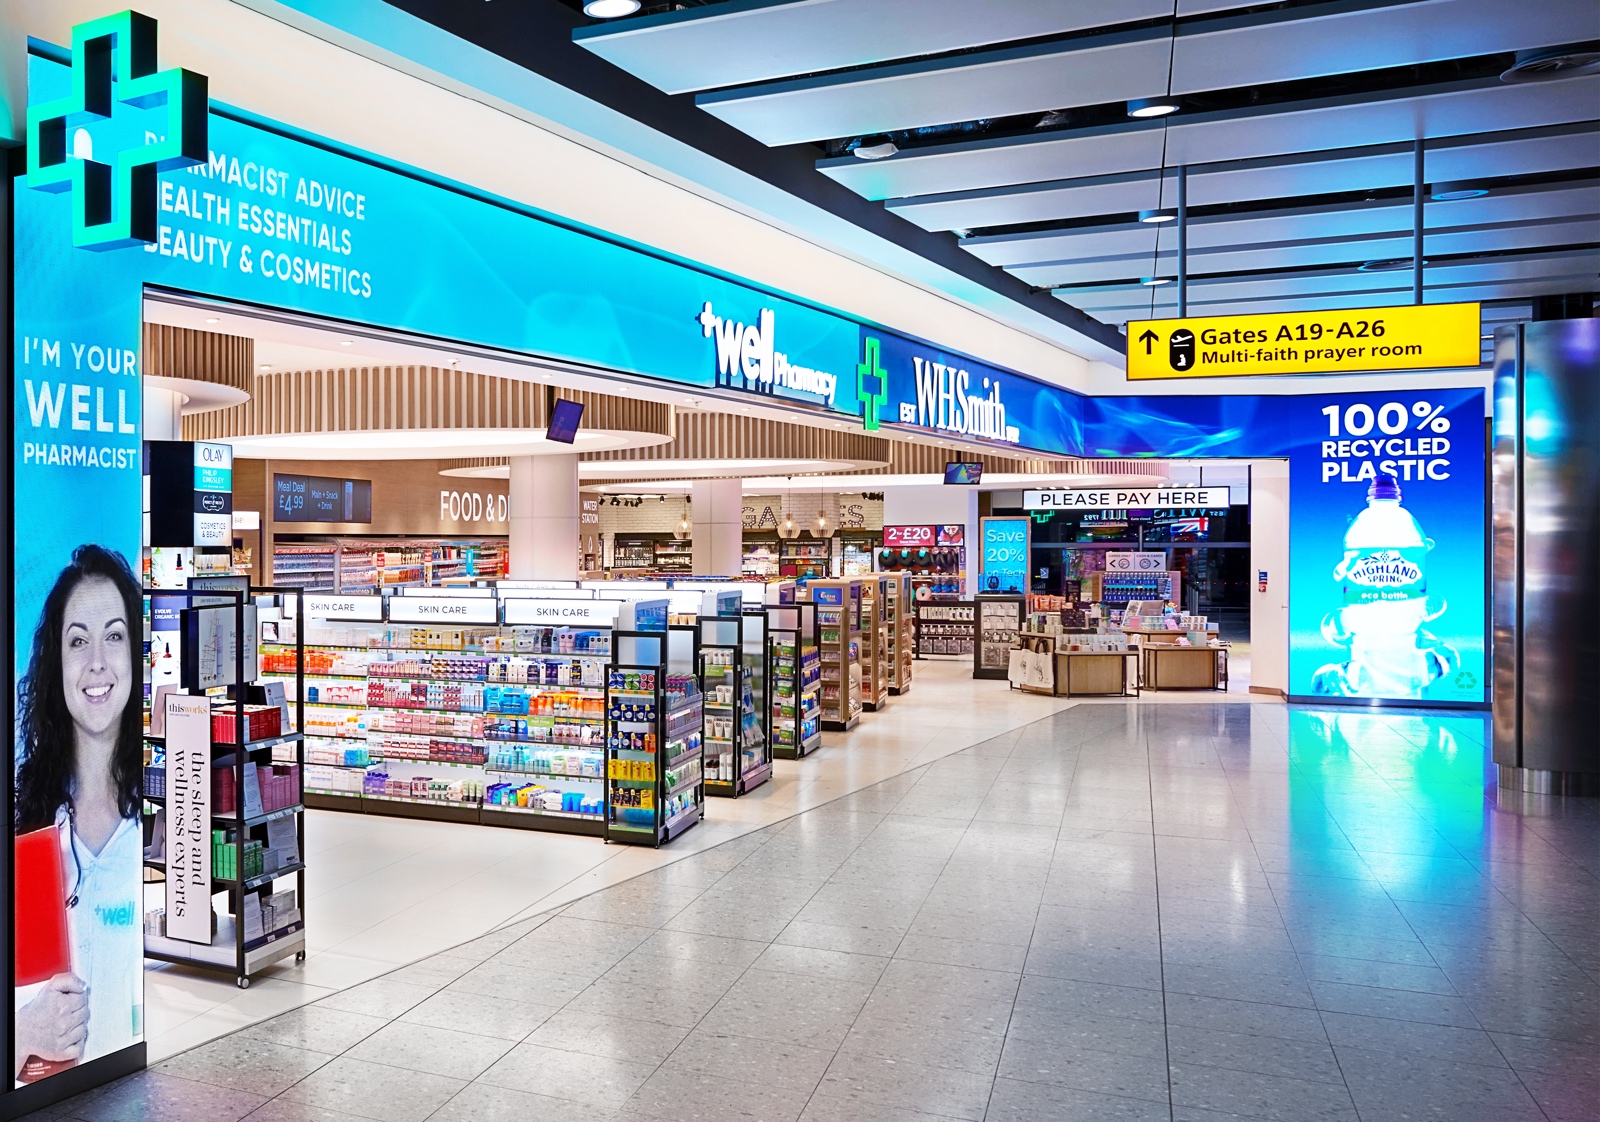 travel connect whsmith